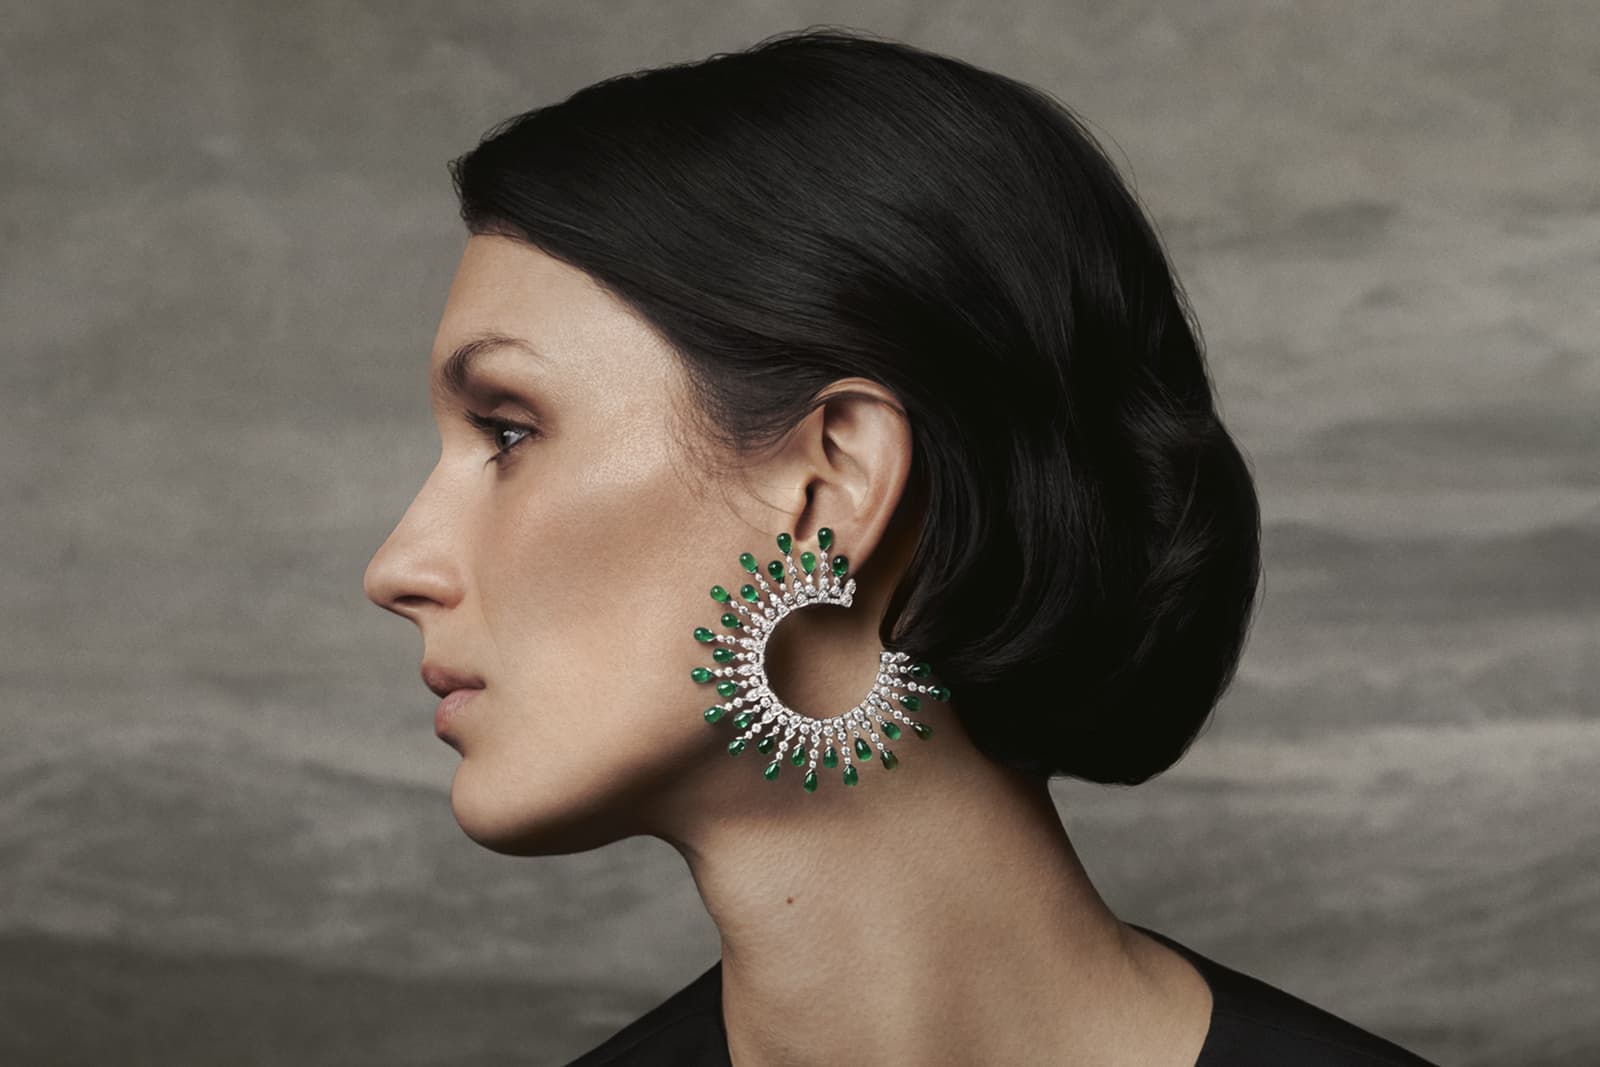 Boucheron New Maharajah earrings set with 58 drop emeralds of 35.93 carats from the Histoire de Style New Maharajahs High Jewellery Collection